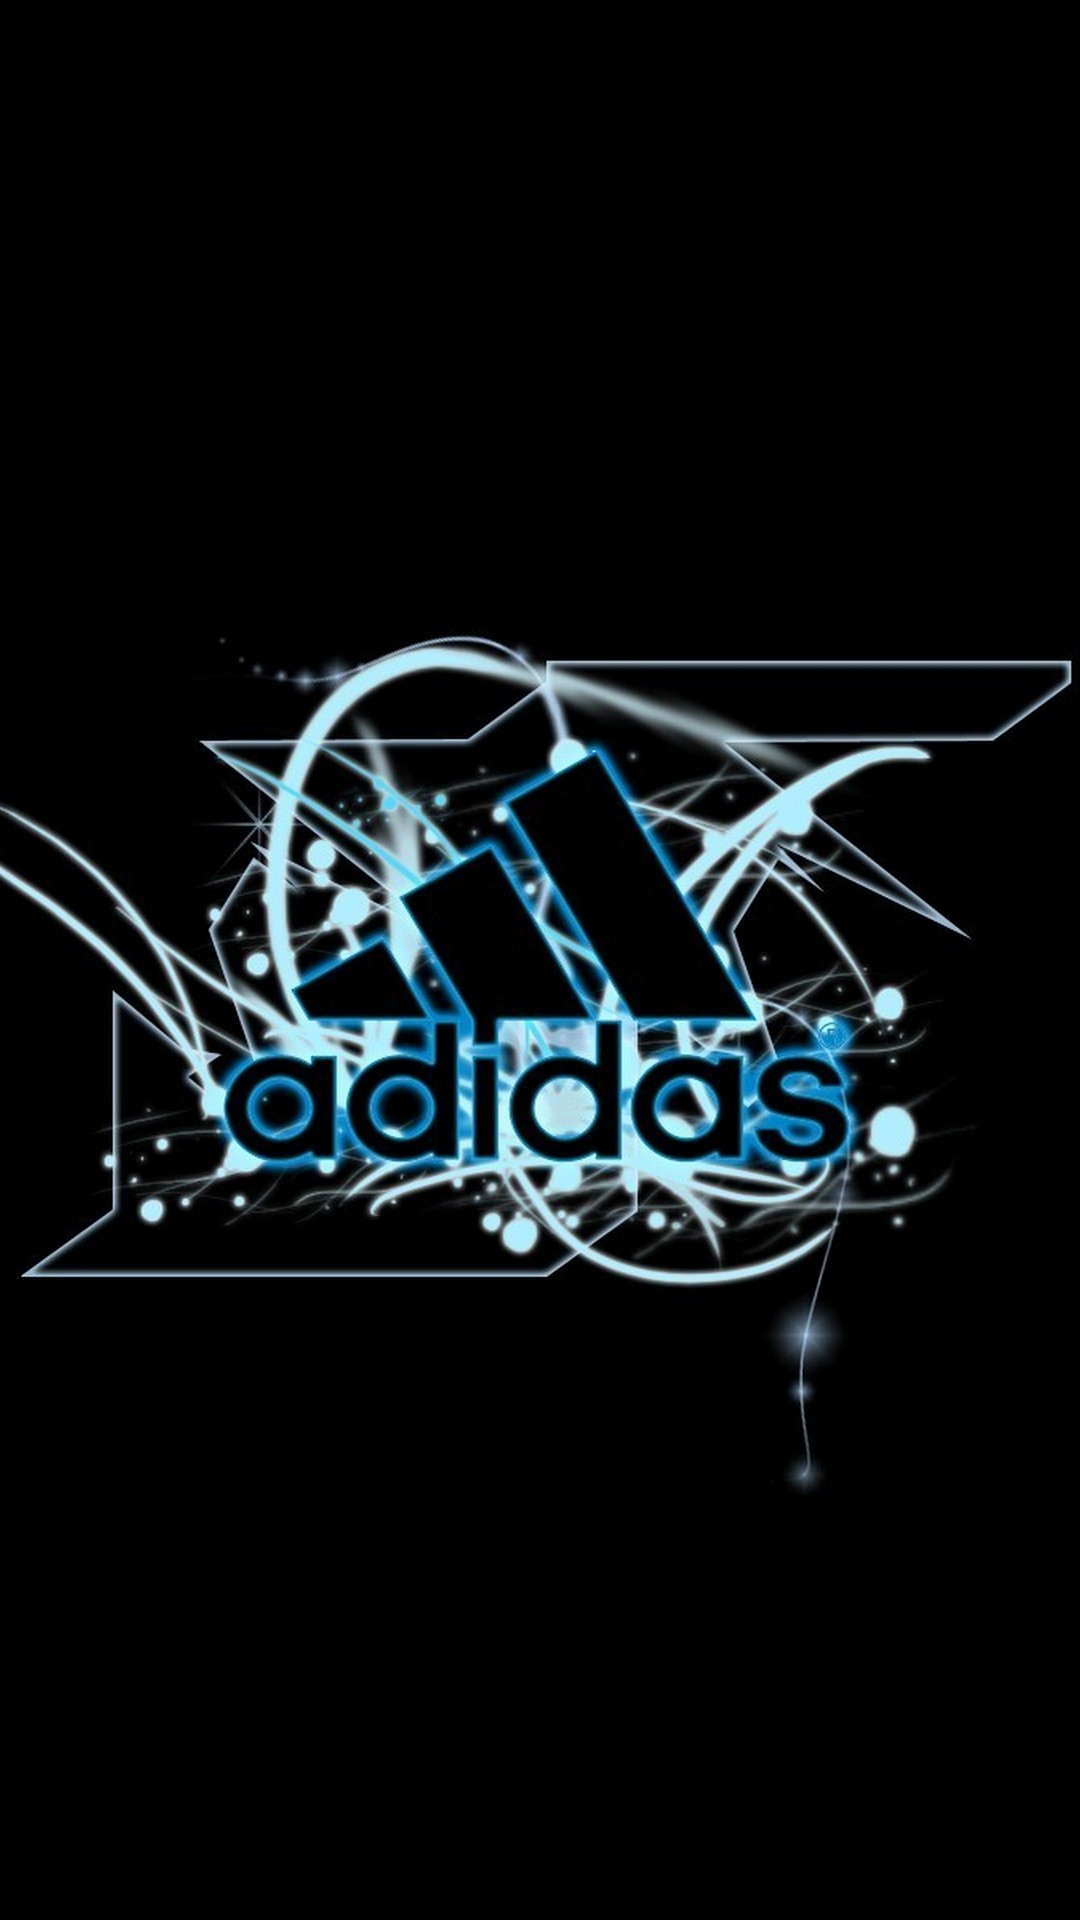 Adidas Logo Wallpaper For Android with high-resolution 1080x1920 pixel. You can use this wallpaper for your Android backgrounds, Tablet, Samsung Screensavers, Mobile Phone Lock Screen and another Smartphones device